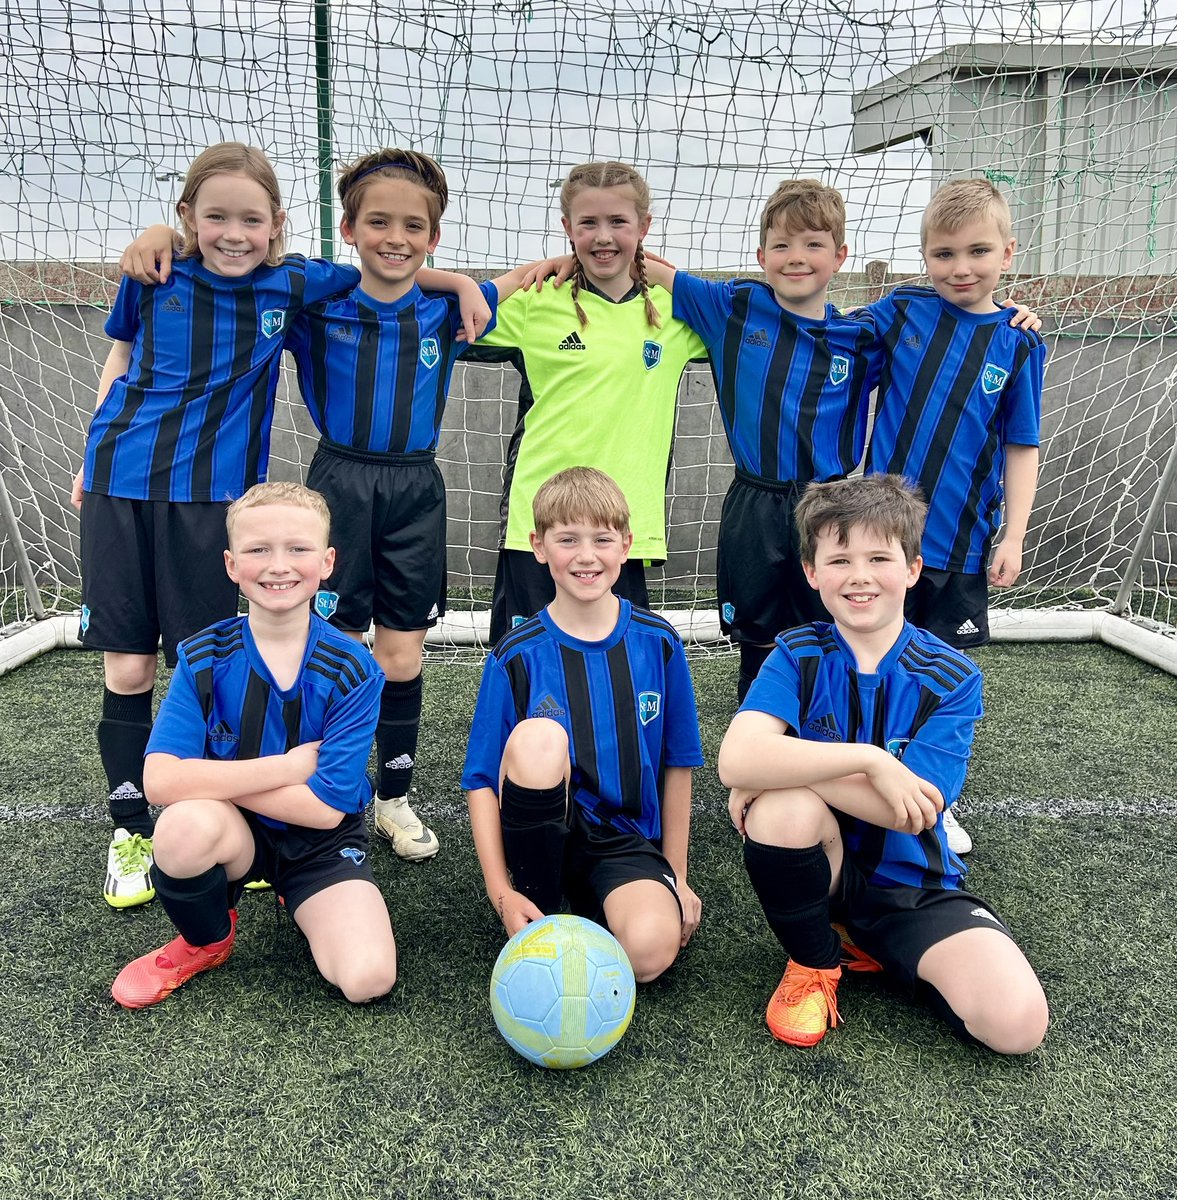 We had a wonderful afternoon playing at the @NWATrust Y3/4 football tournament today ⚽️ There were goals galore and some great teamwork on show - well done everyone 🤩